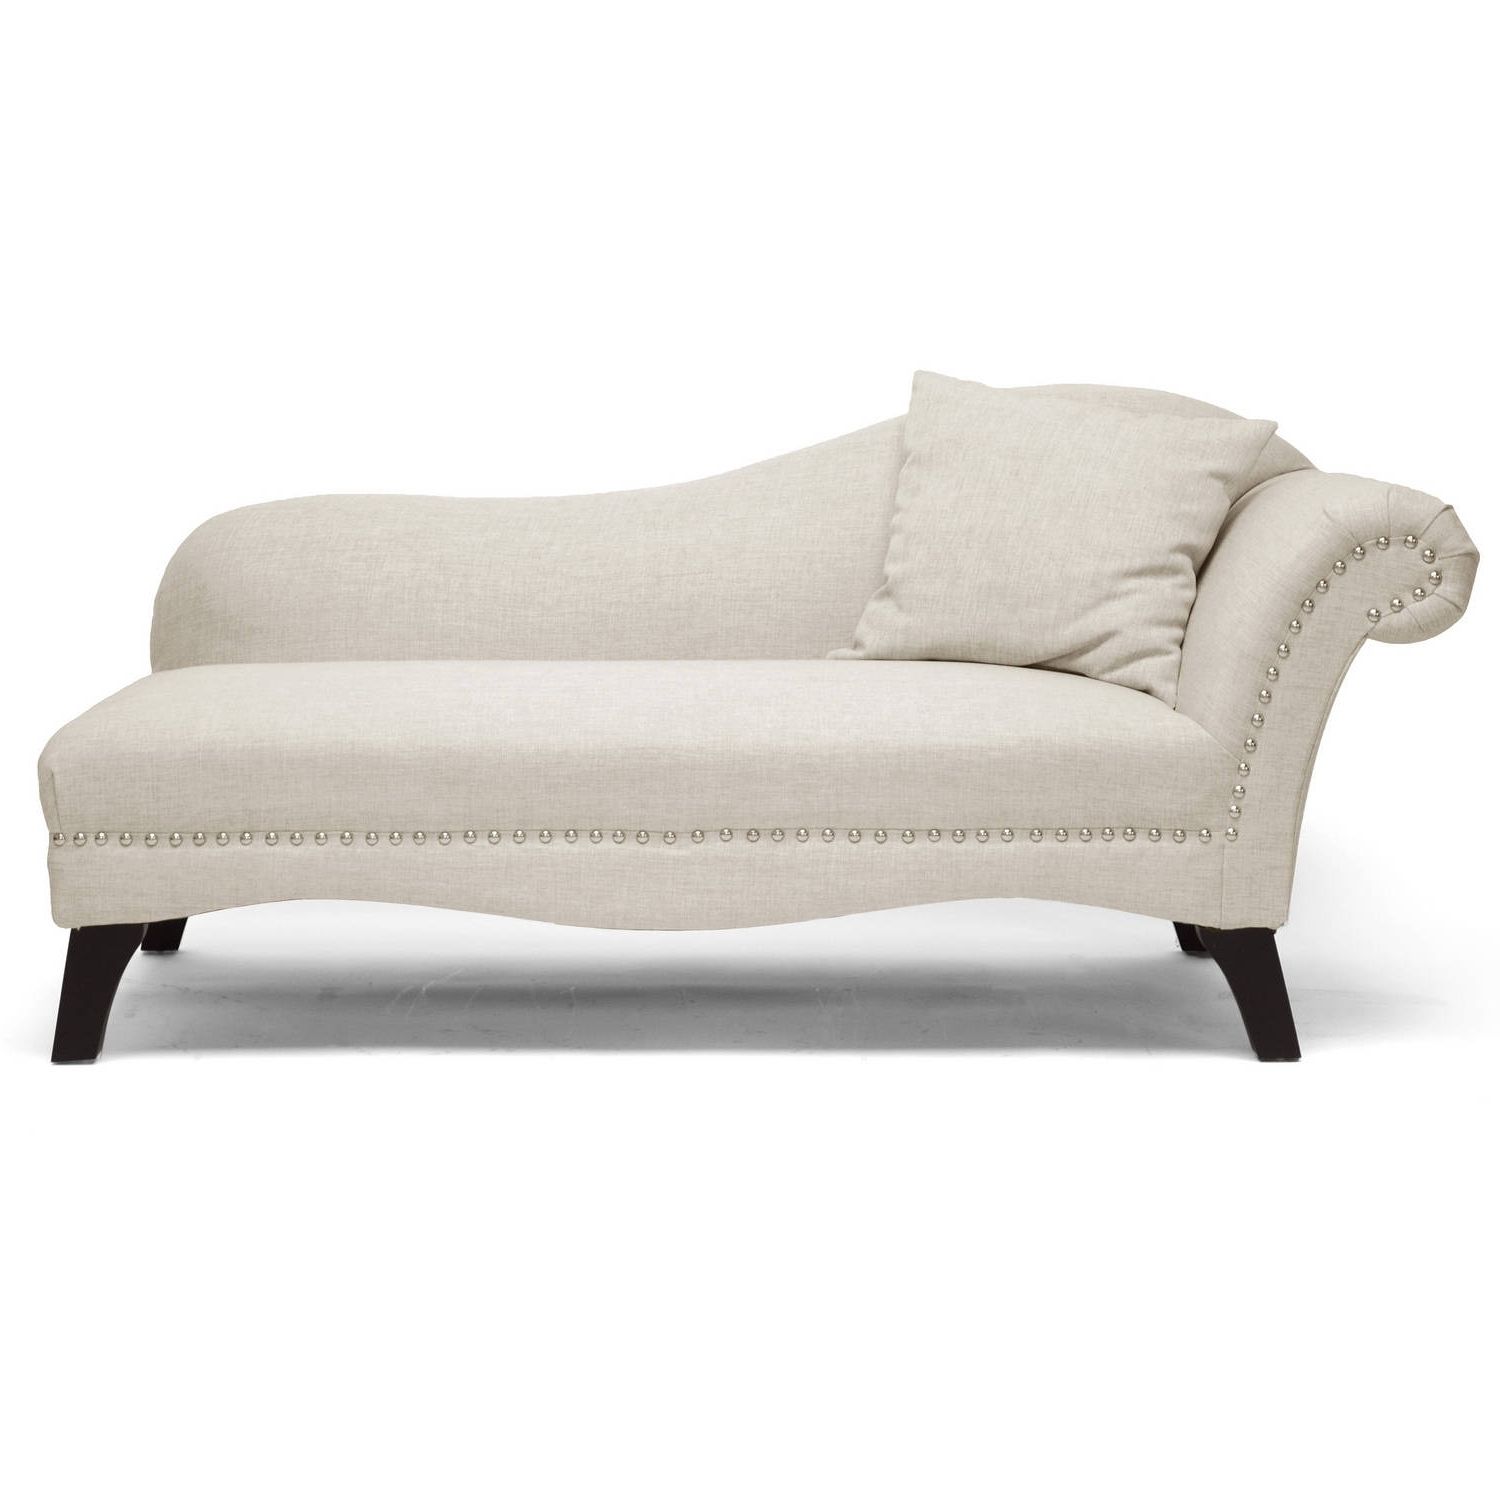 Most Popular Cheap Chaise Lounges Intended For Chaise Lounges – Walmart (View 1 of 15)